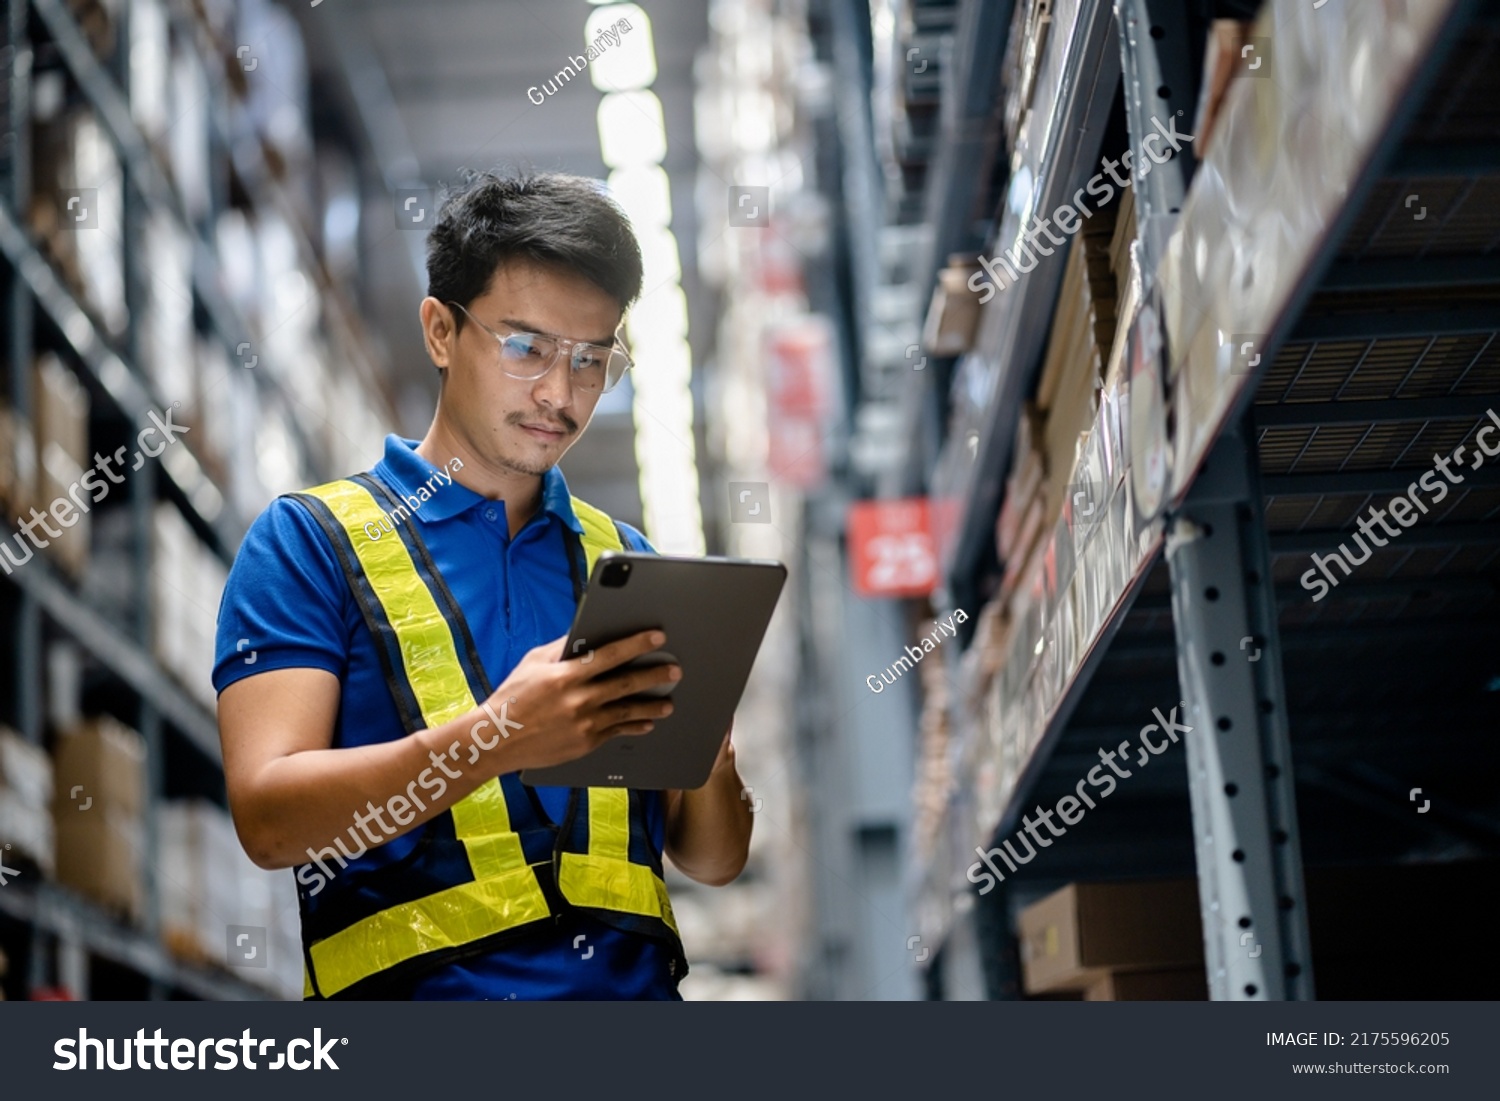 Warehouse Worker in safety suite using digital tablets to check the stock inventory in large warehouses, a Smart warehouse management system, supply chain and logistic network technology concept. #2175596205